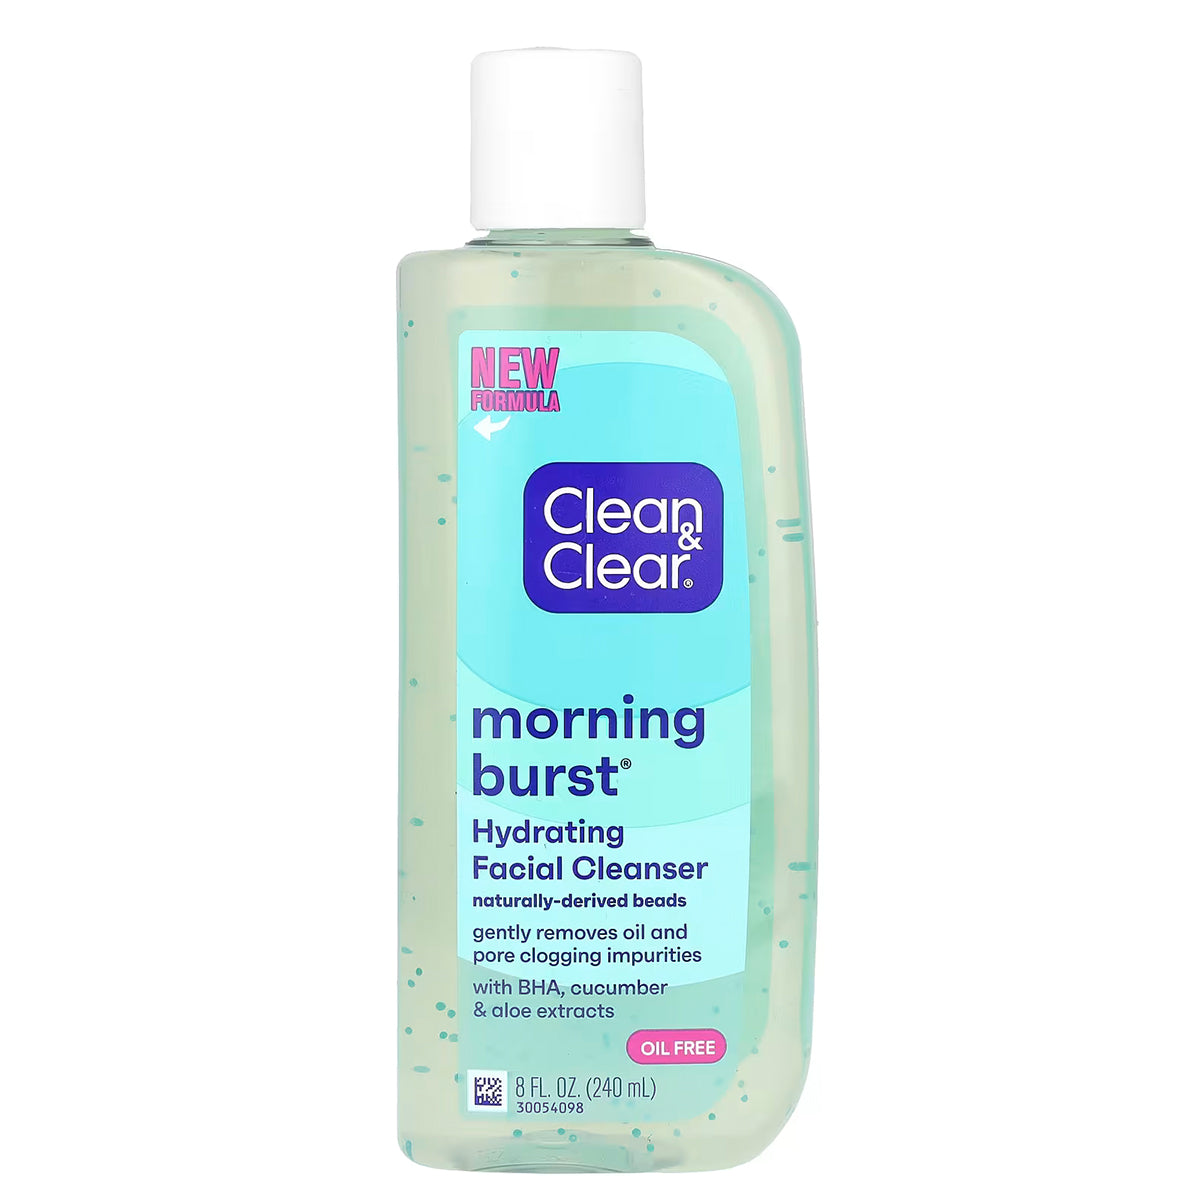 Clean & Clear Morning Burst Hydrating Facial Cleanser 8oz